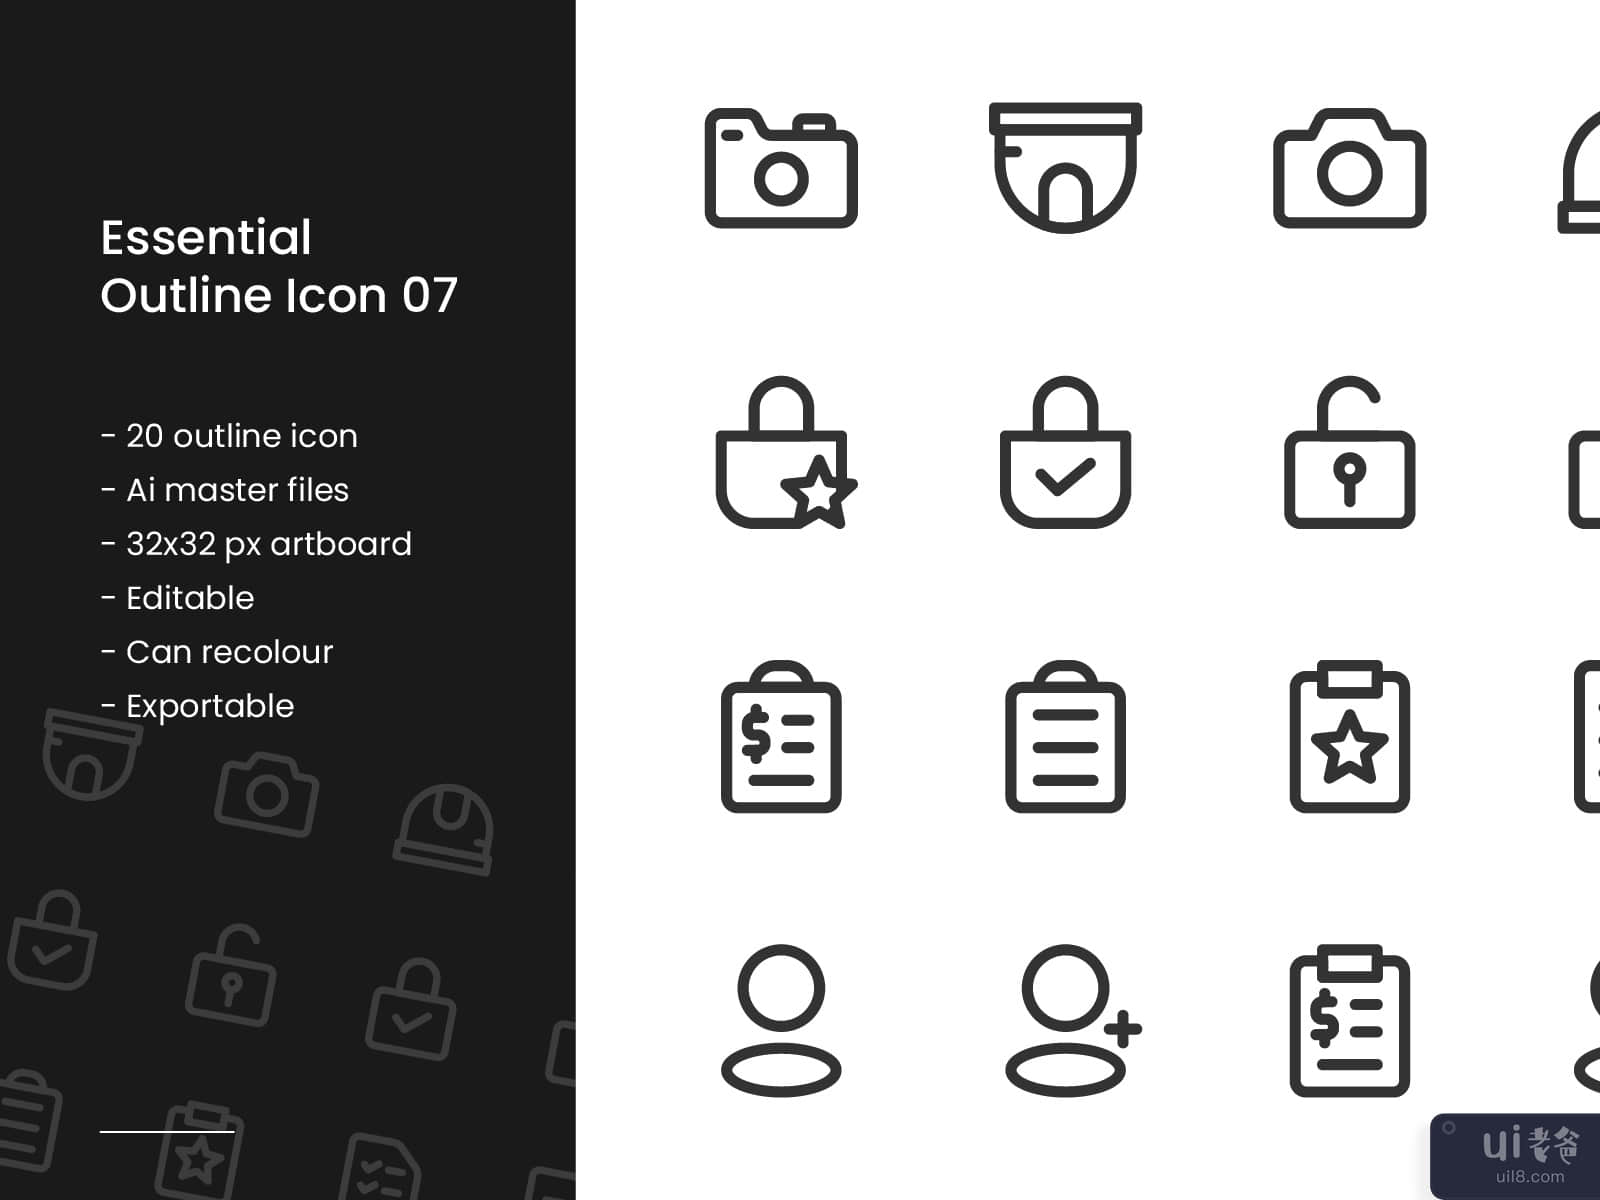 Essential Outline Icon 07